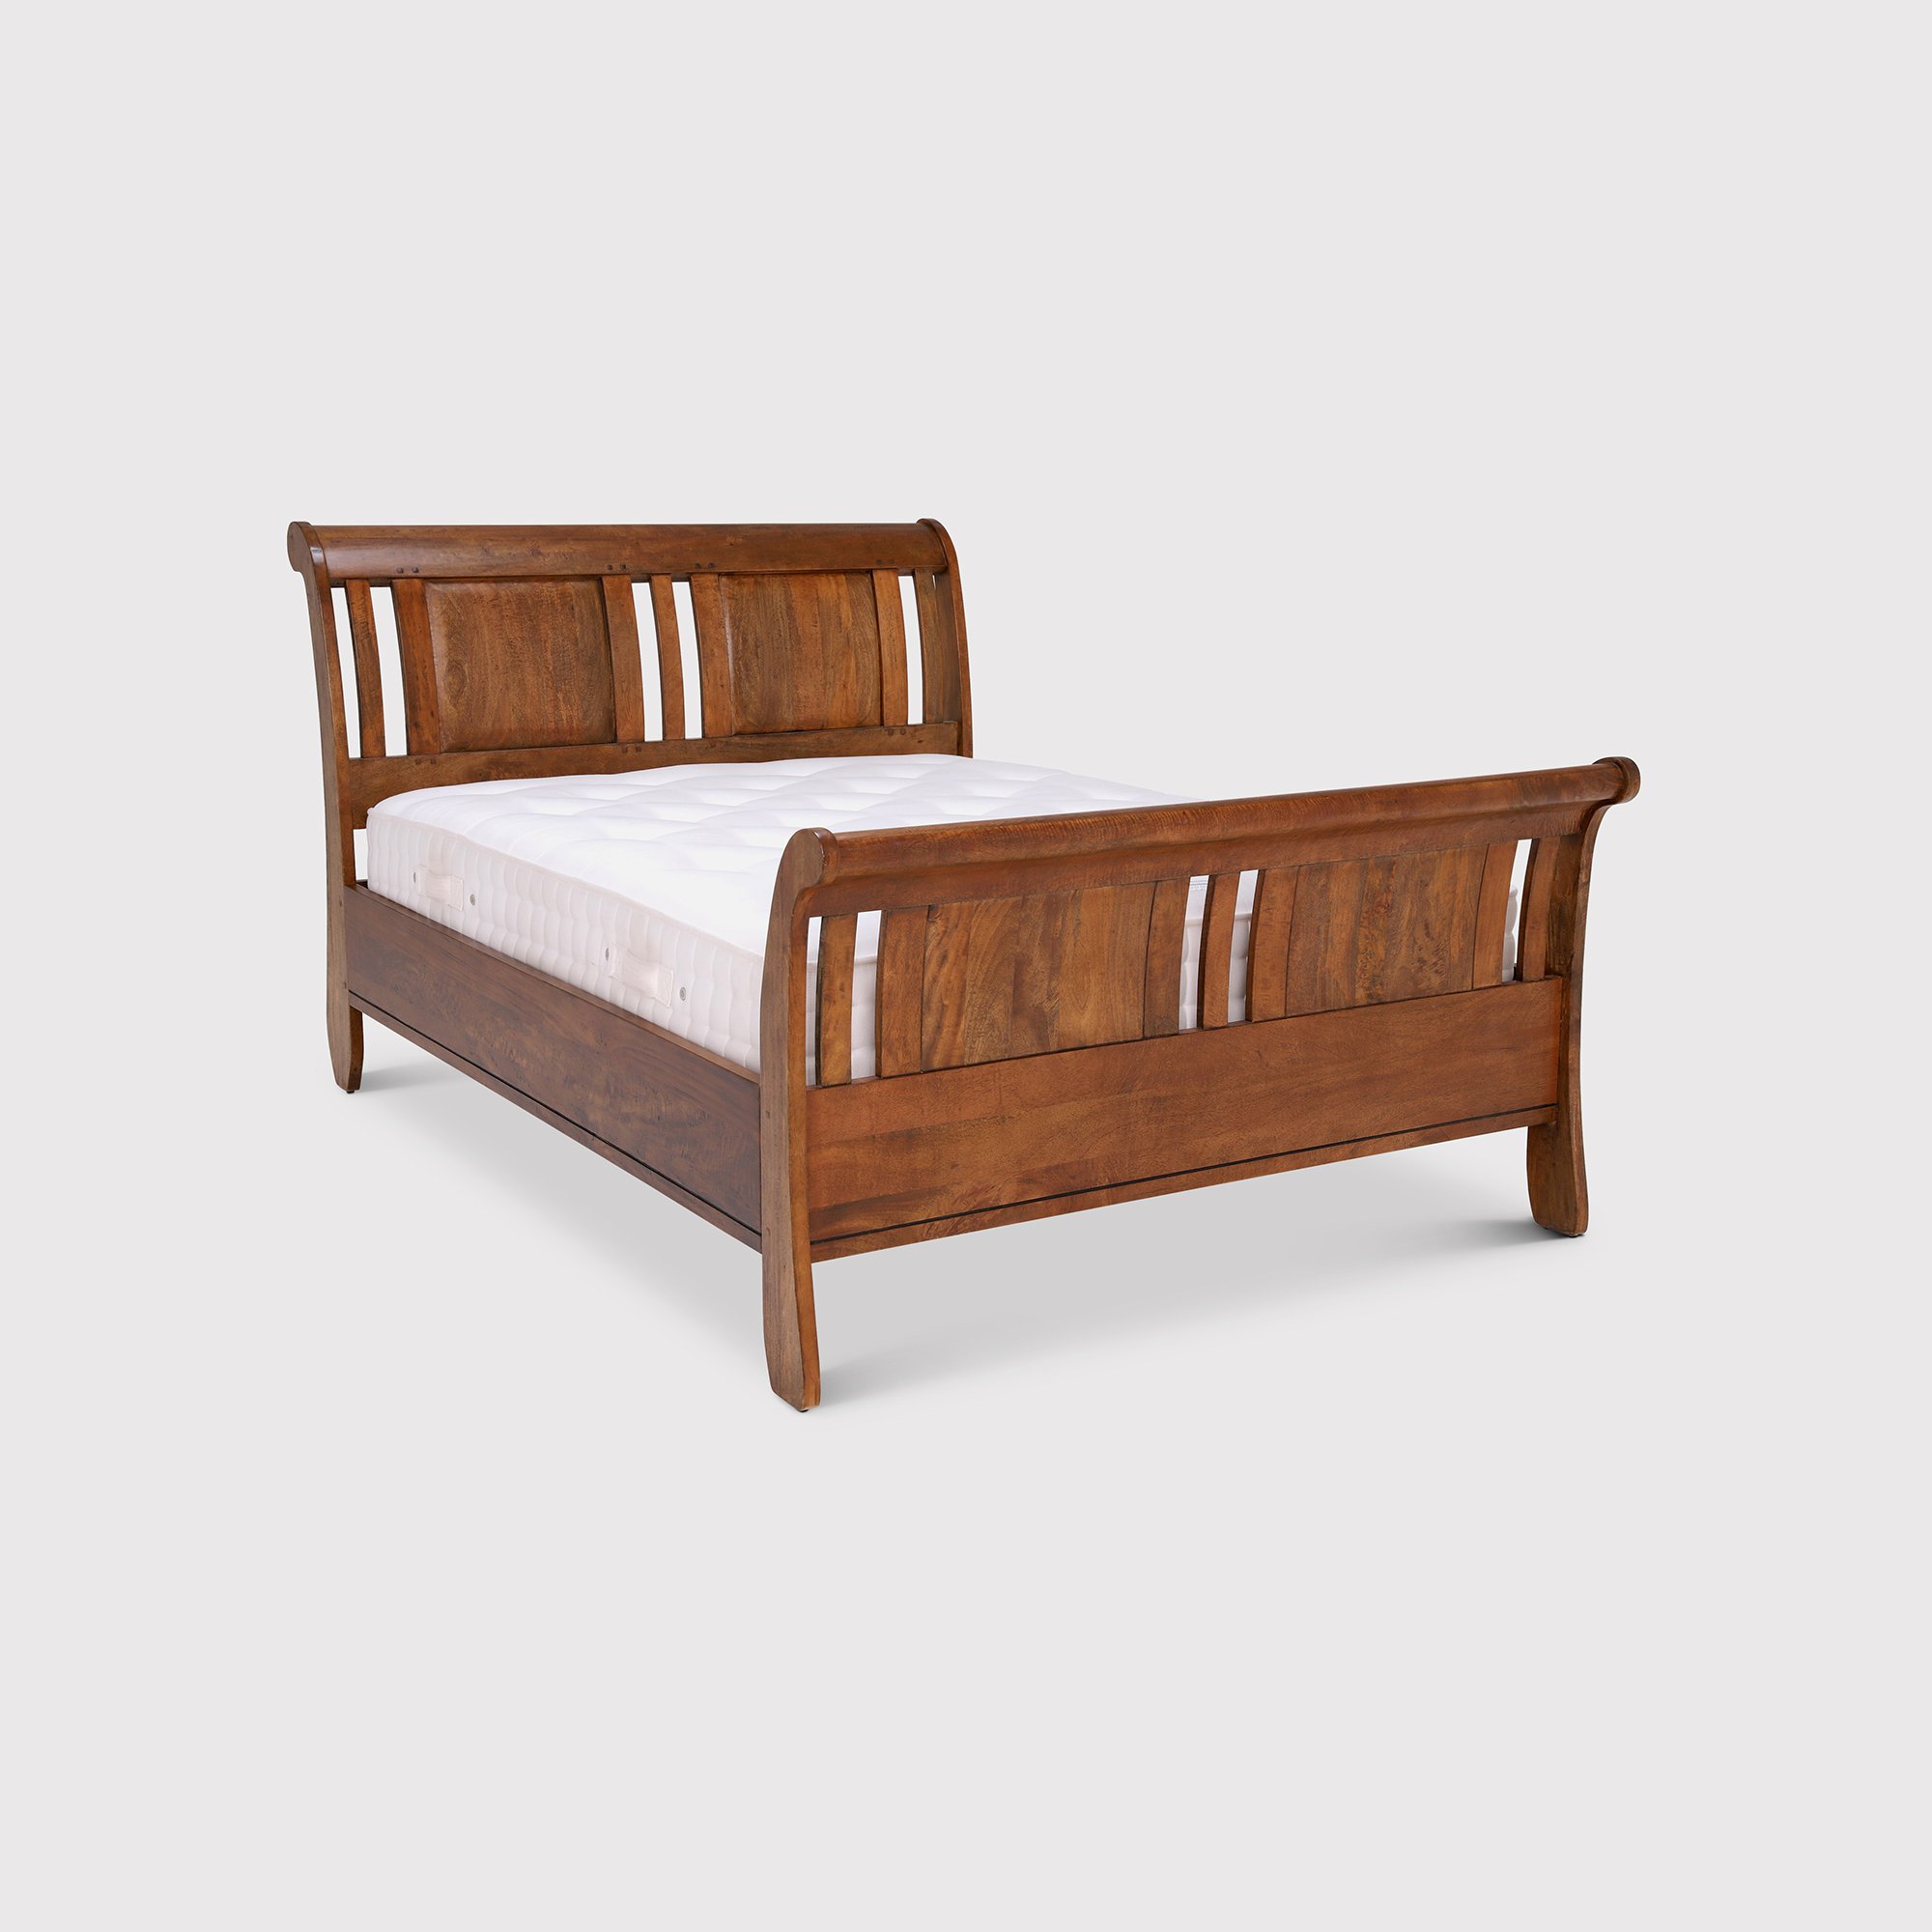 New Frontier 180cm Sleigh Bed, Brown | Super King | Barker & Stonehouse